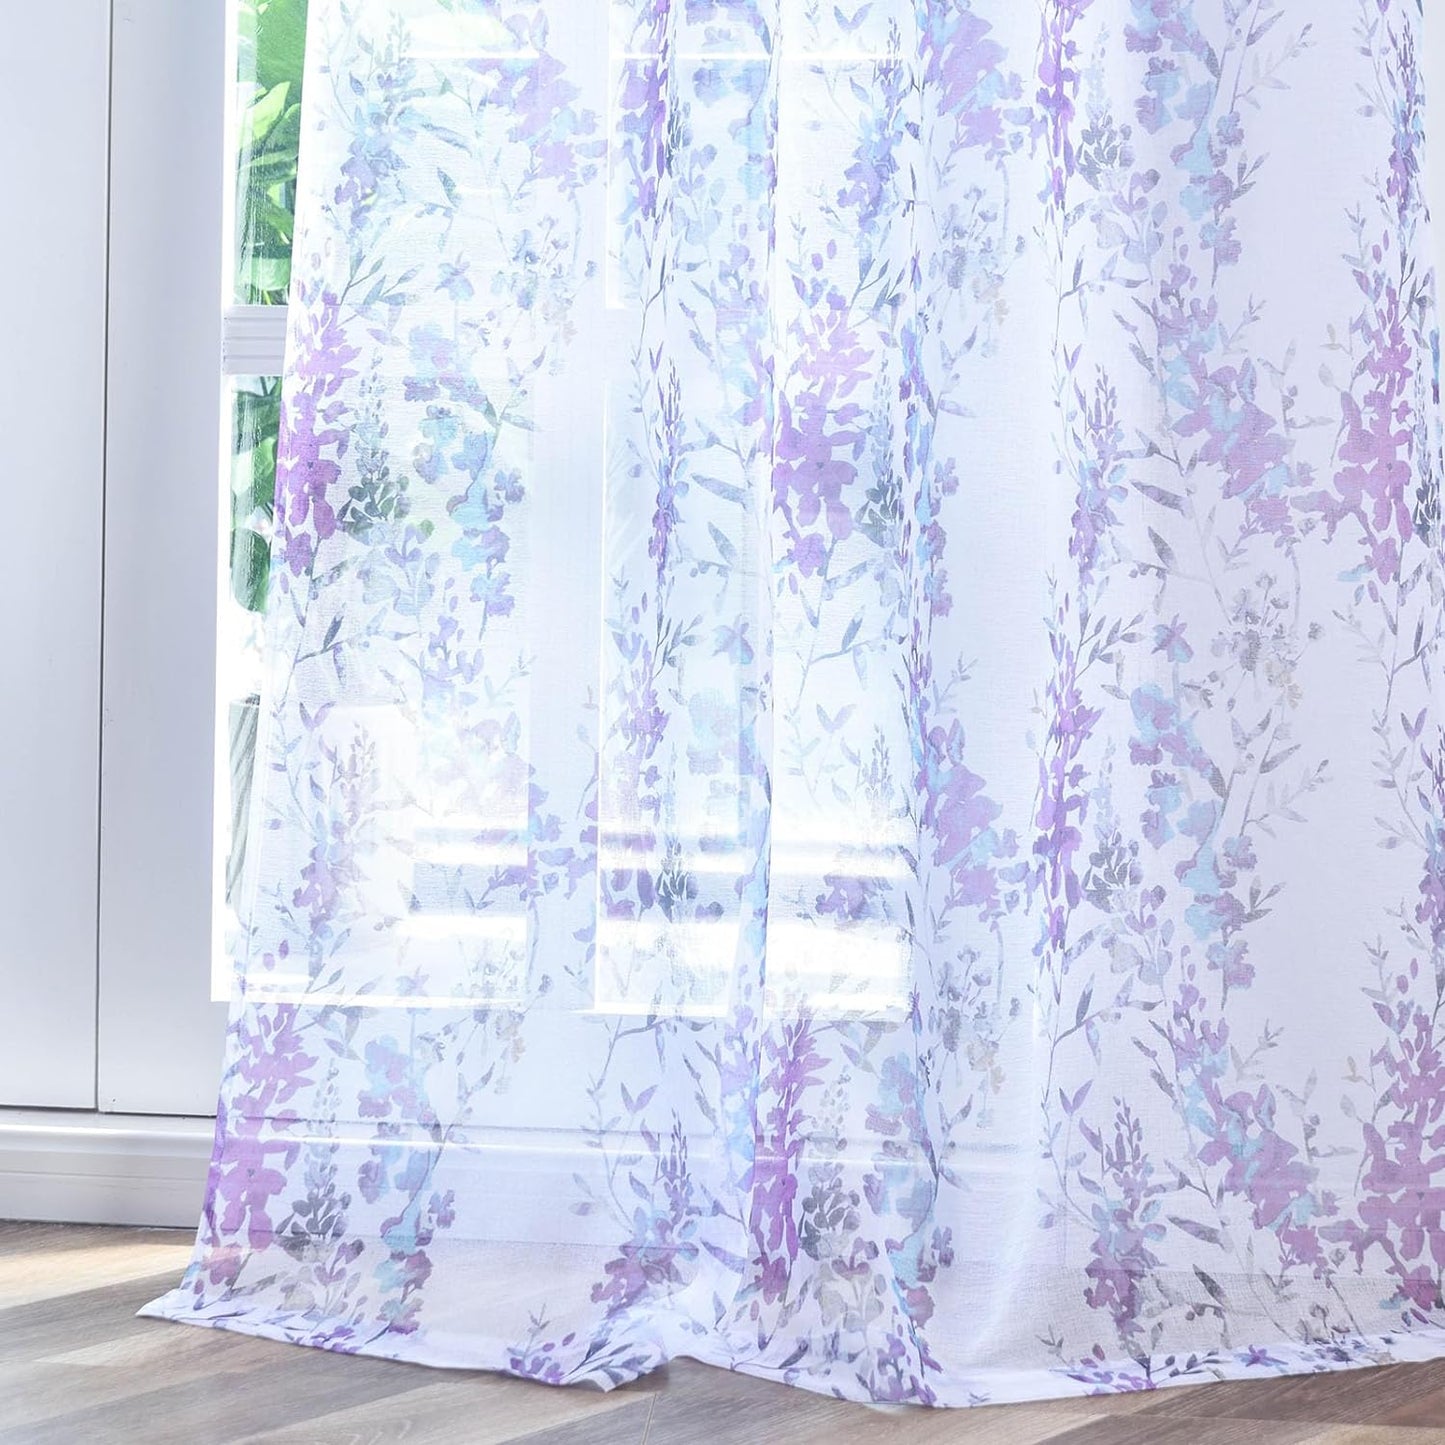 Kotile Grey White Sheer Curtains, Classic Vintage Branch Leaf Printed Sheer Curtains 63 Inch Length 2 Panels Set, Privacy Rod Pocket Sheer Window Floral Curtains, 50 X 63 Inch, Grey  Kotile Textile Purple W50 X L96 Inch 